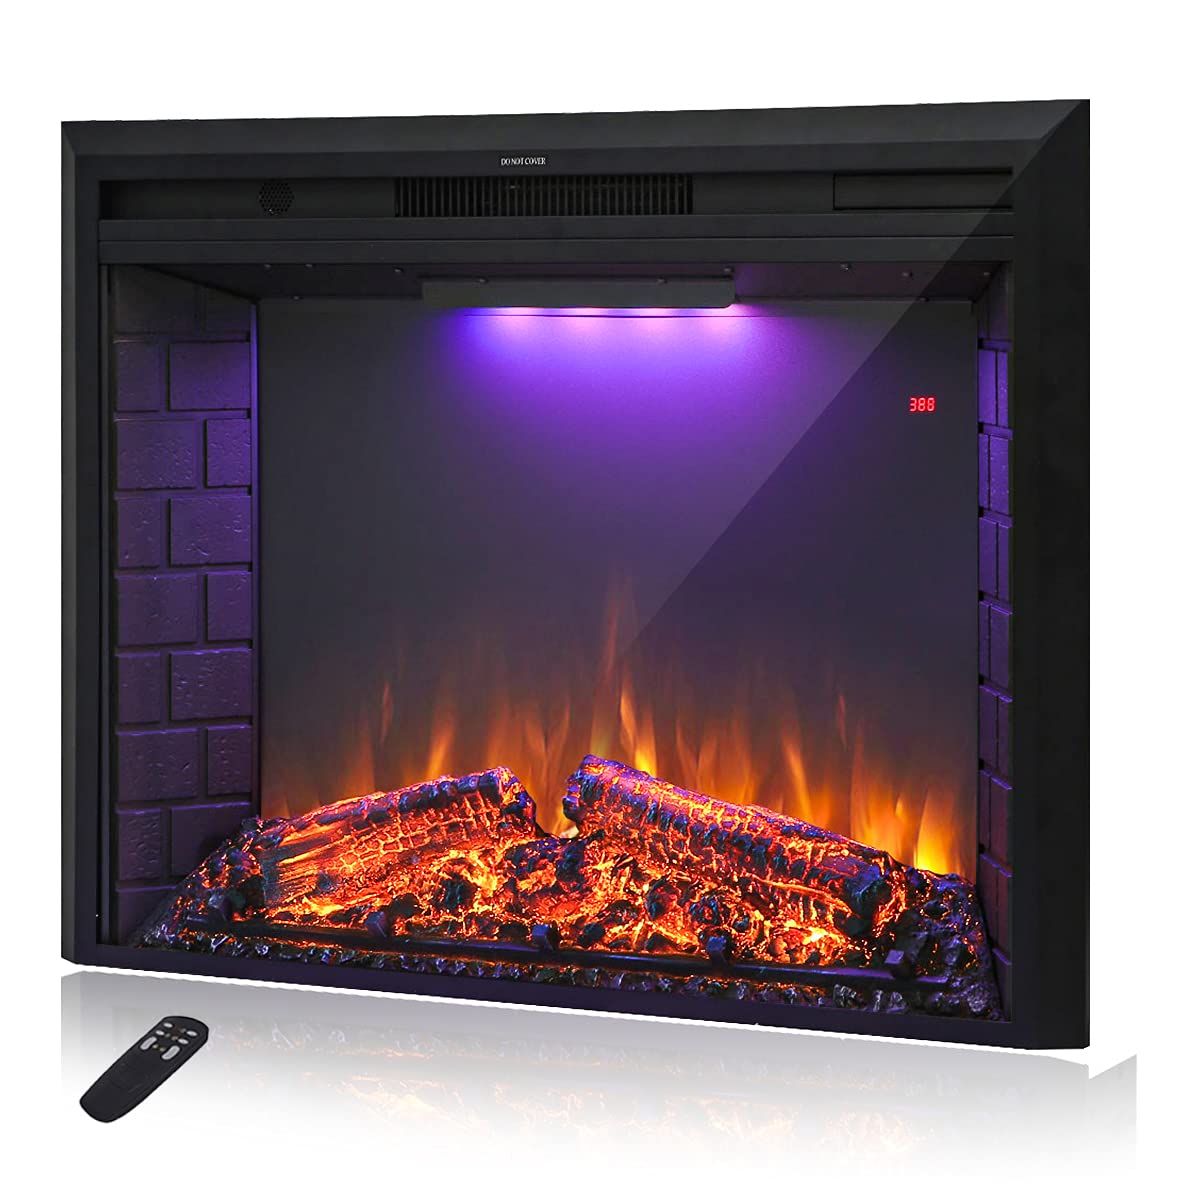 Masarflame 36'' Electric Fireplace Insert, Retro Recessed Fireplace Heater with Fire Cracking Sound, Remote Control & Timer, 750